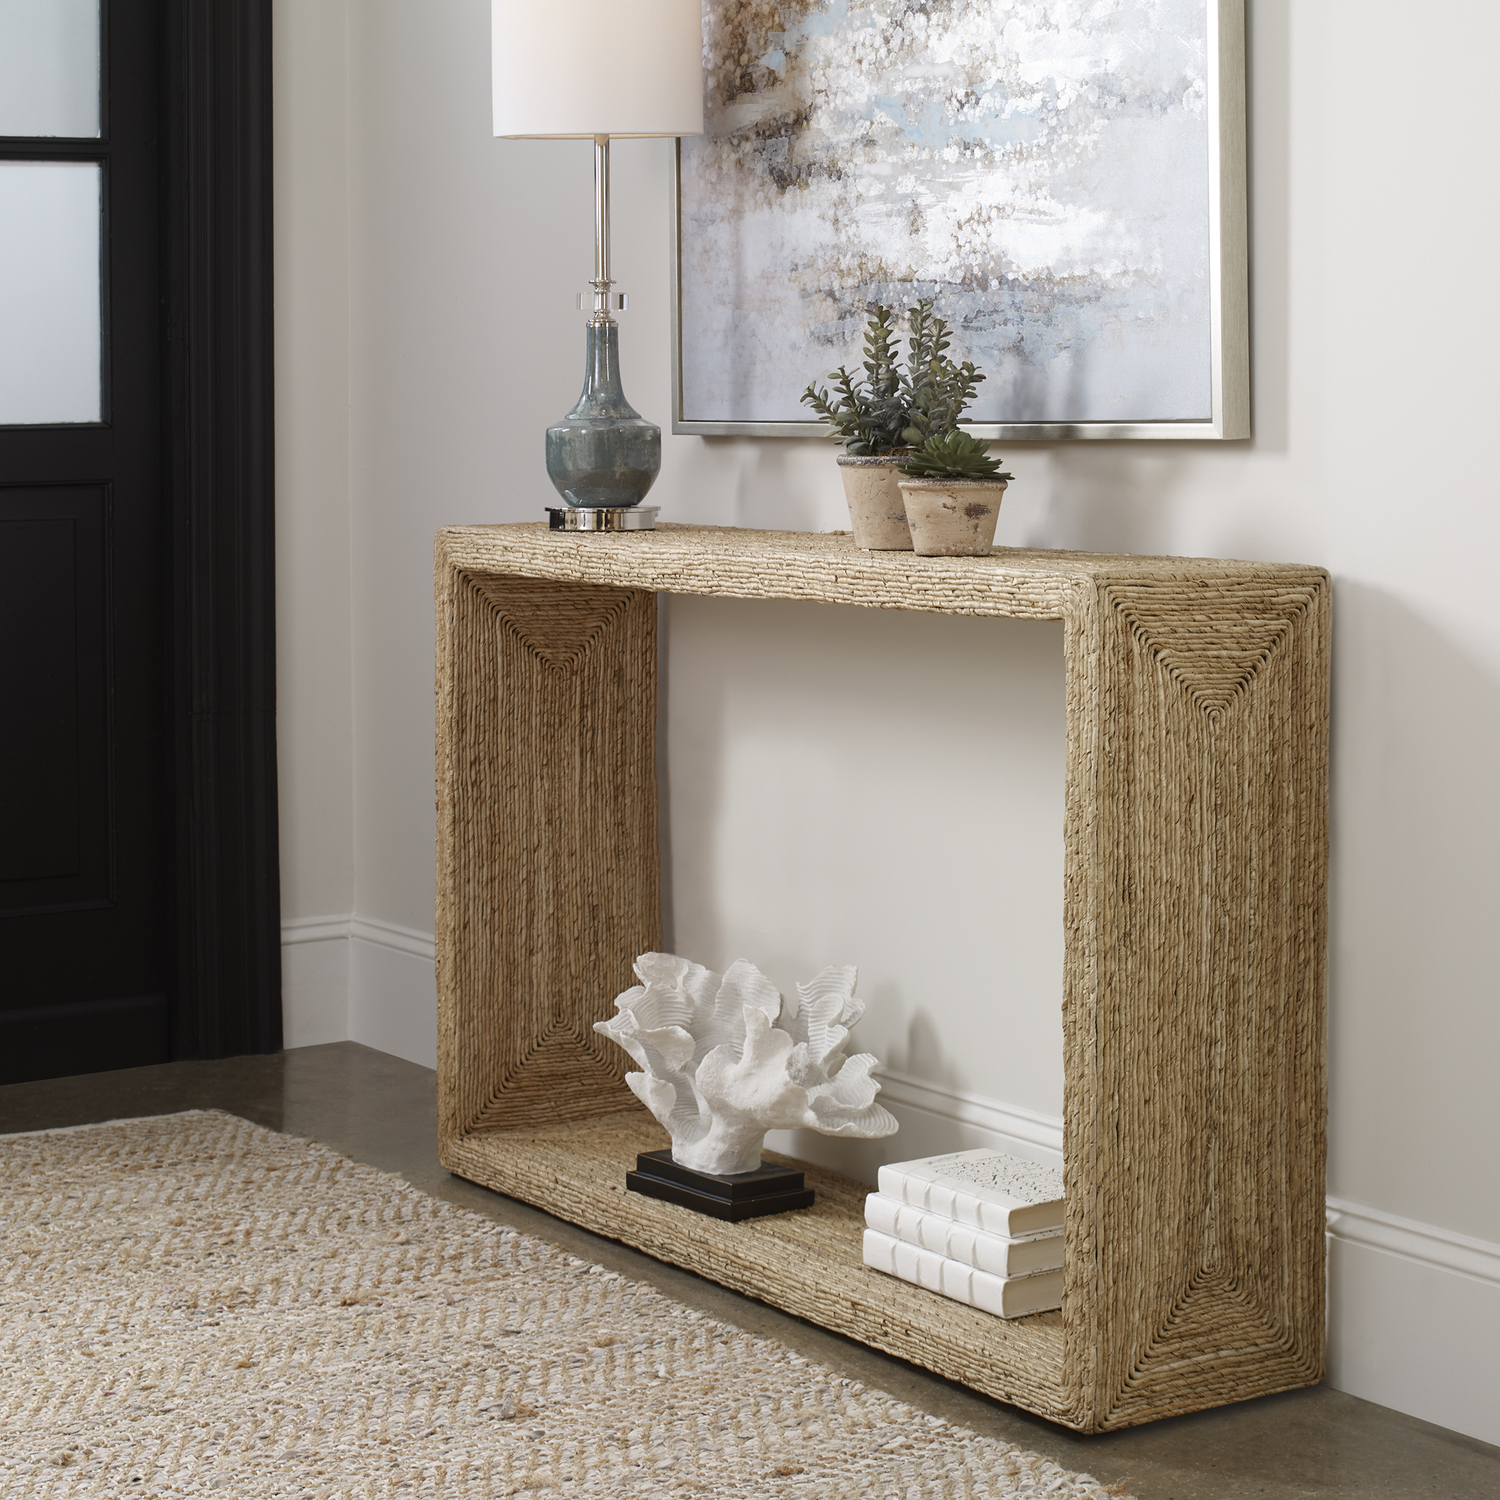 oak end tables Uttermost Console & Sofa Tables Equal Parts Relaxed And Refined, This Console Table Embodies Casual Coastal Style. Wrapped In Natural Woven Banana Plant, Creating Unique Texture And Concentric Color Patterns. The Airy Open Center Allows For Extra Display Space.